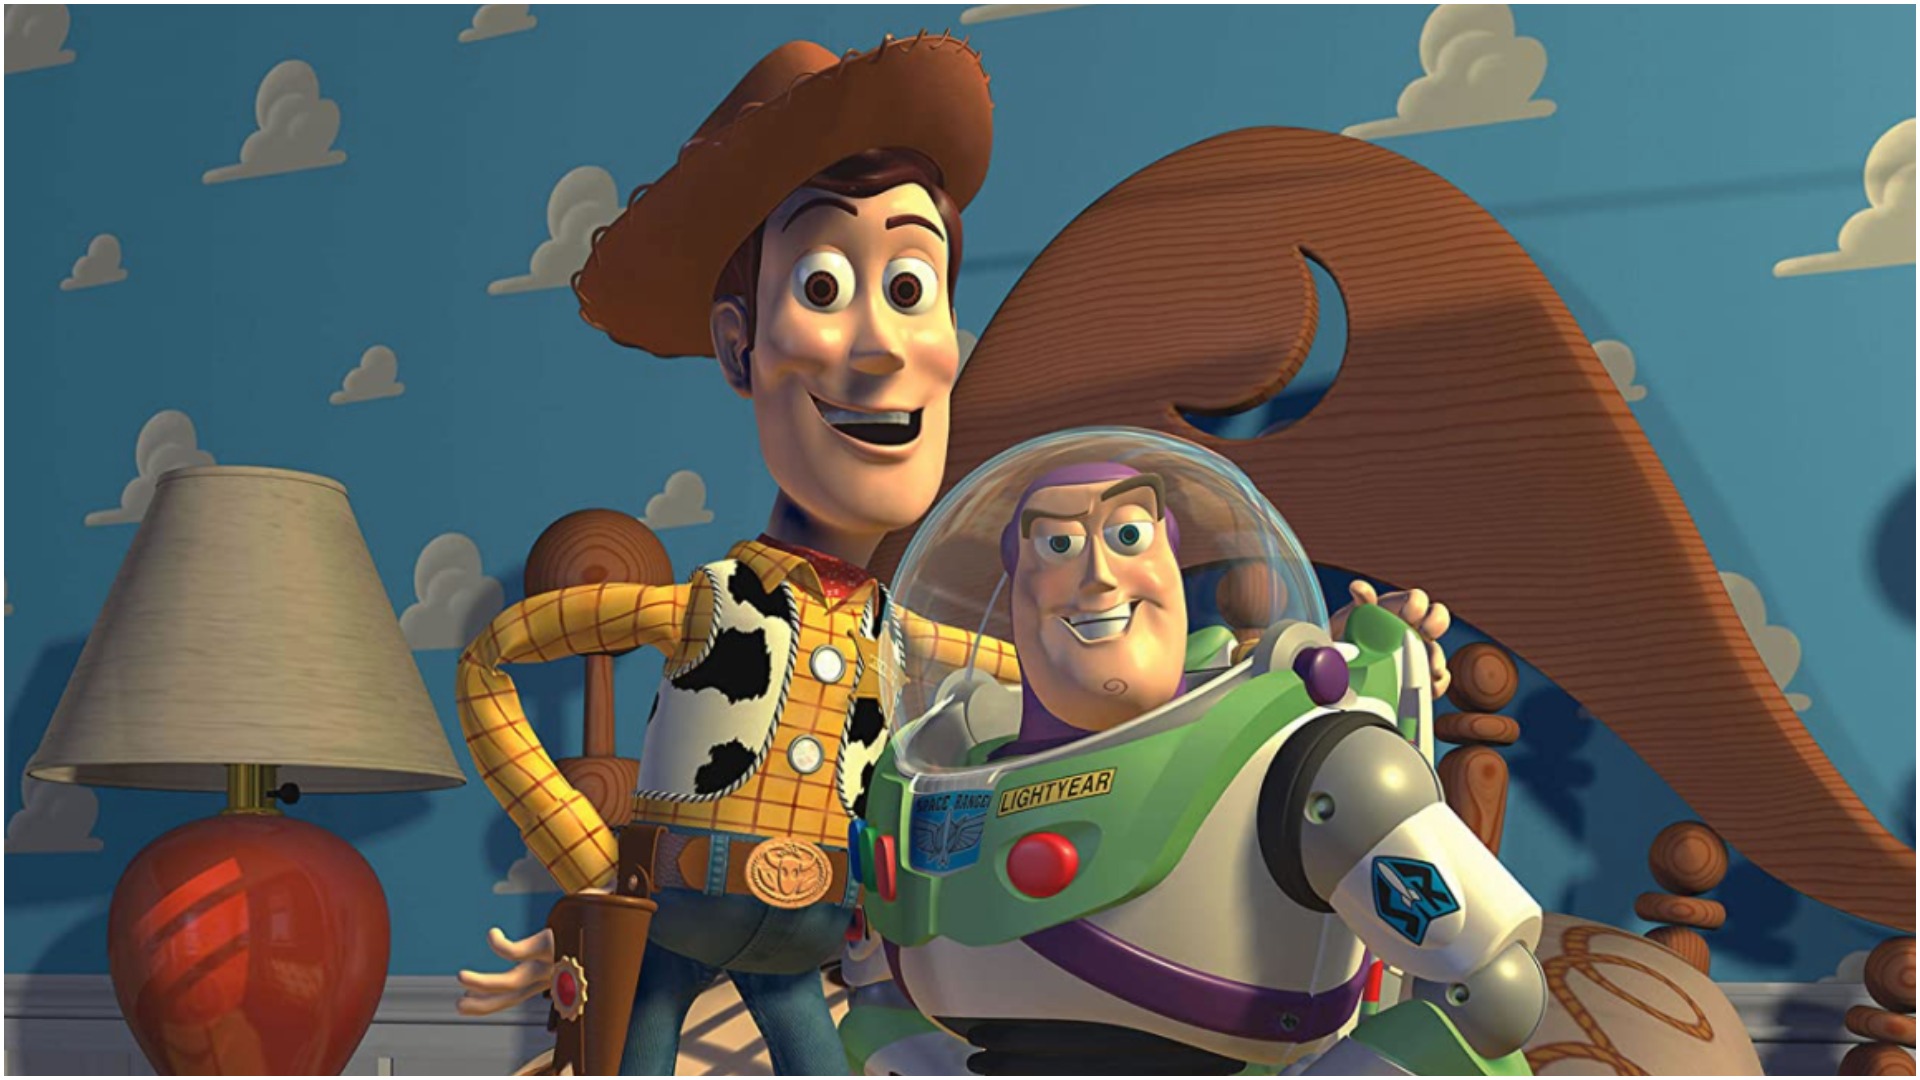 Toy Story at 25: how Pixar's debut evolved tradition rather than